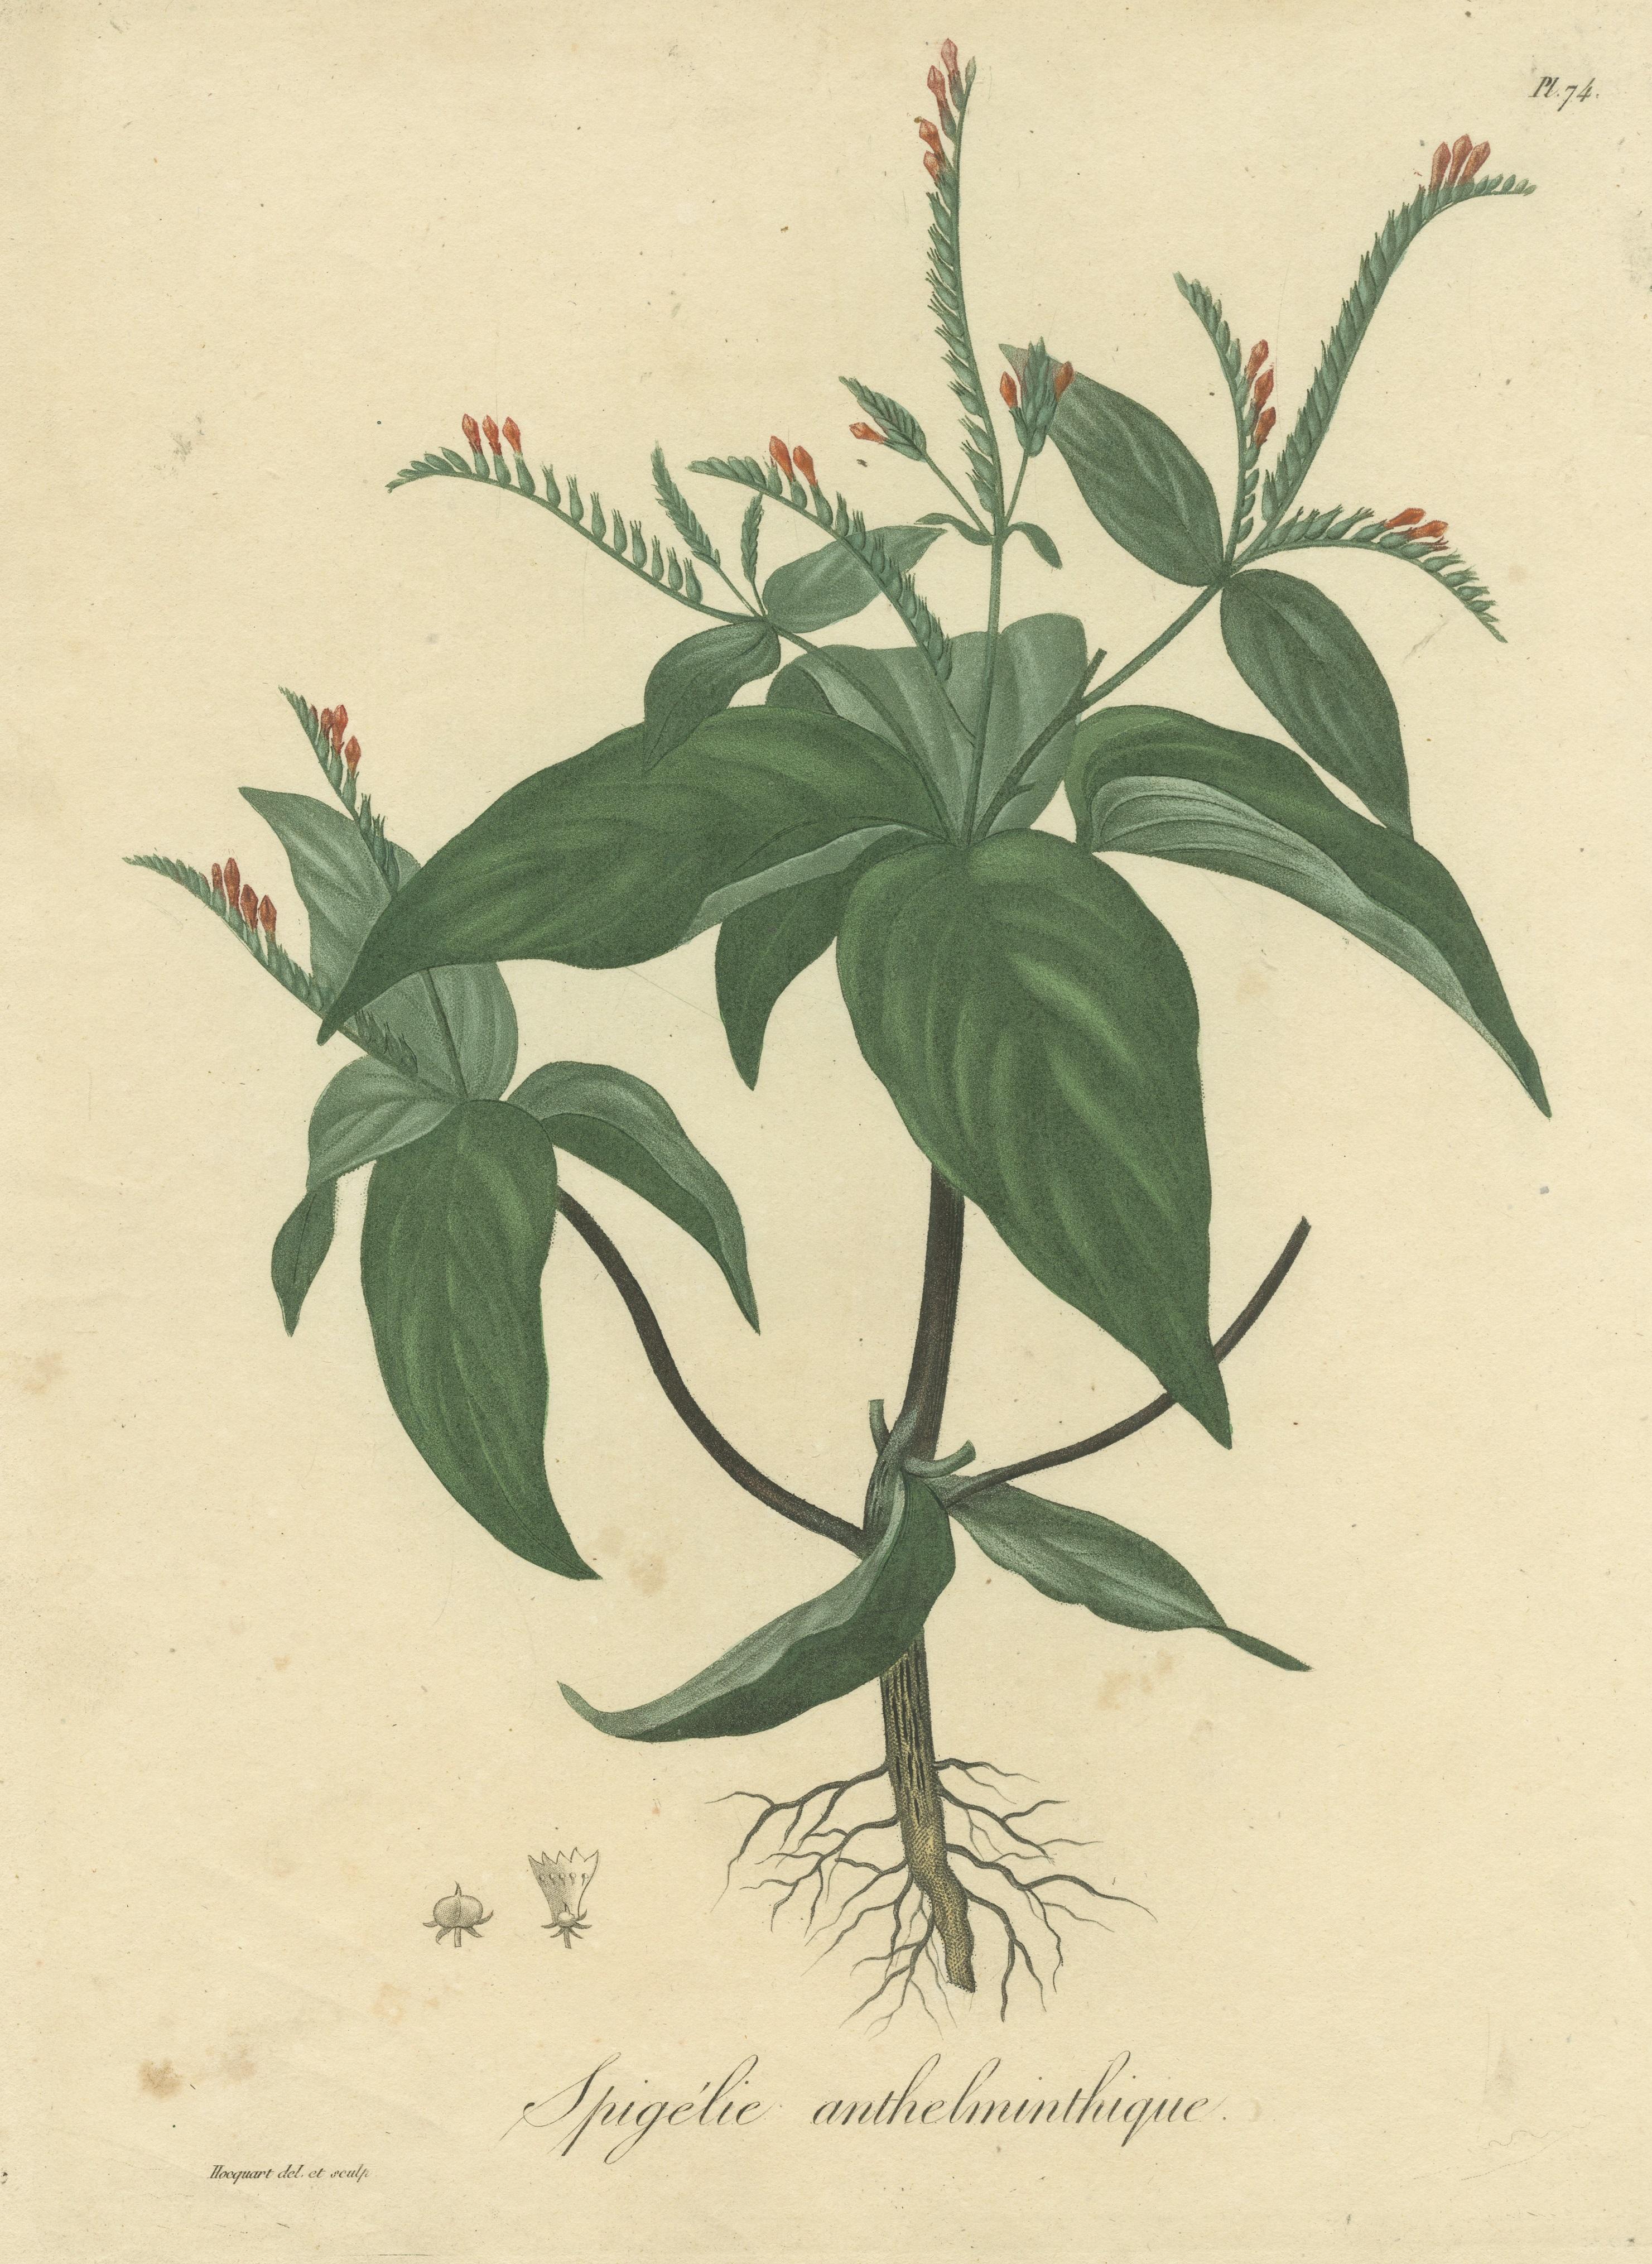 Paper Floral Elegance of the Americas: A Botanical Print of a Spigelia Species, c.1821 For Sale